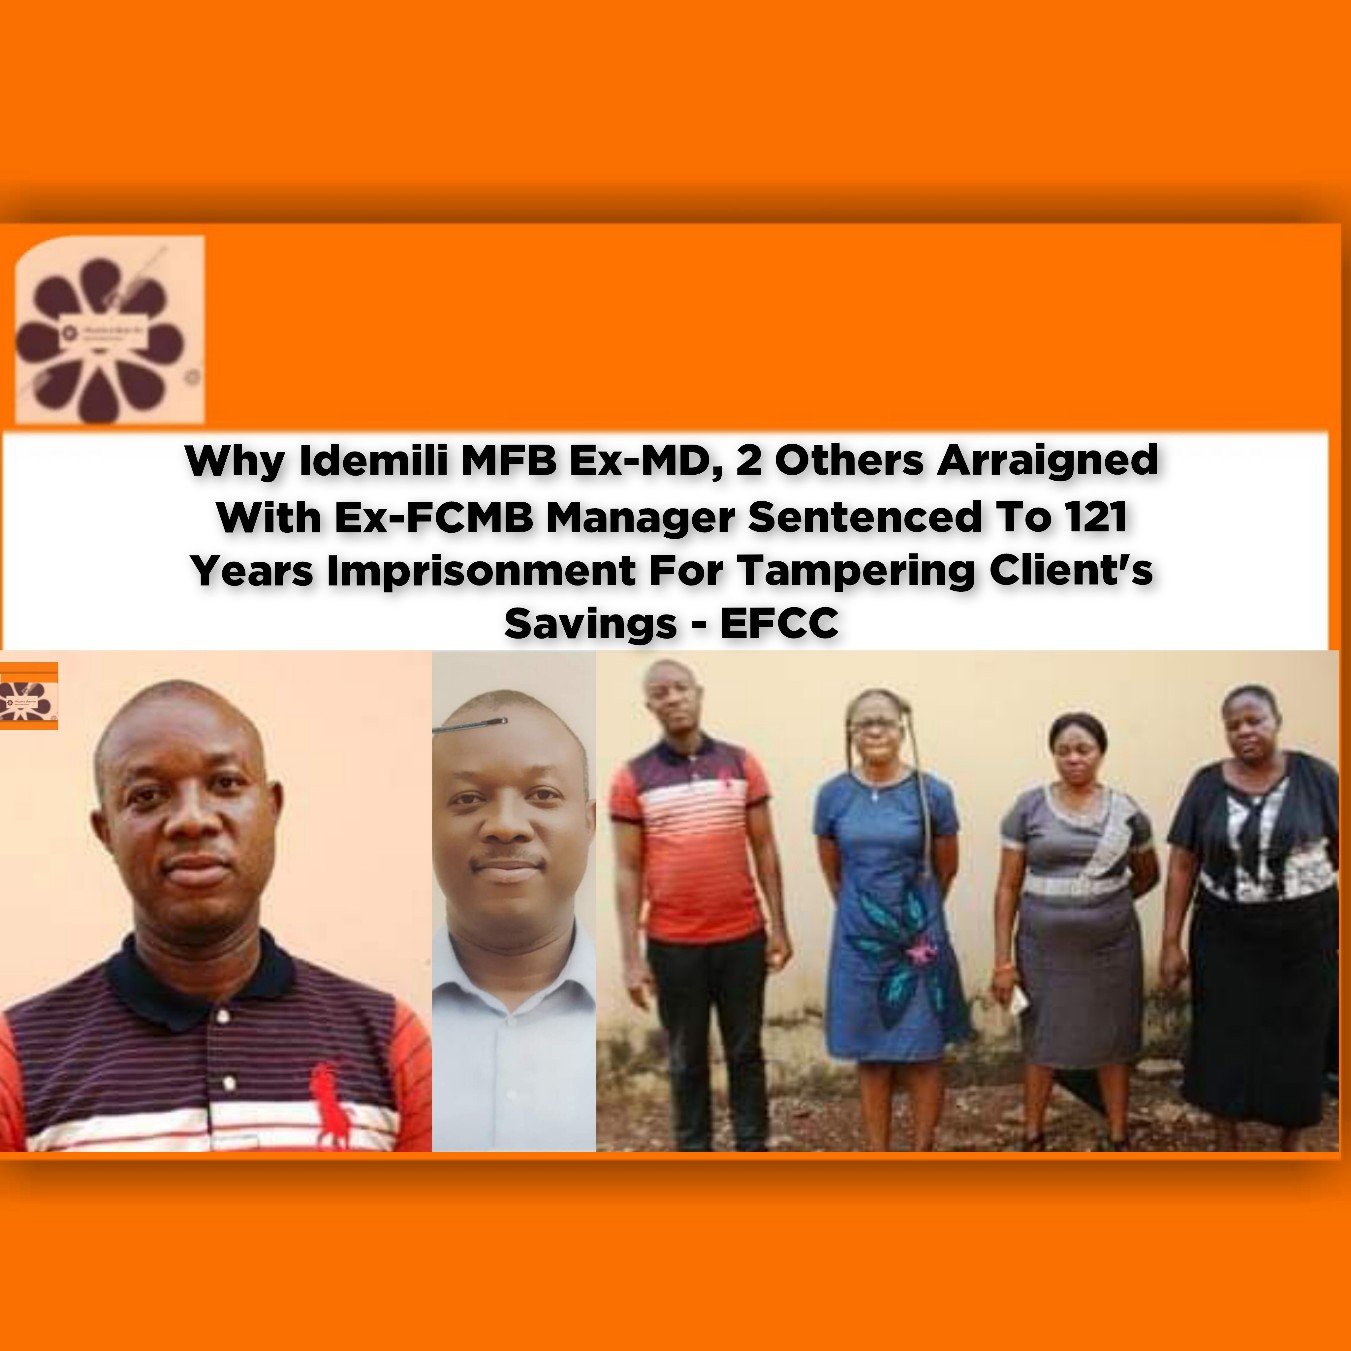 Why Idemili MFB Ex-MD, 2 Others Arraigned With Ex-FCMB Manager Sentenced To 121 Years Imprisonment For Tampering Client's Savings - EFCC ~ OsazuwaAkonedo #Adeleke